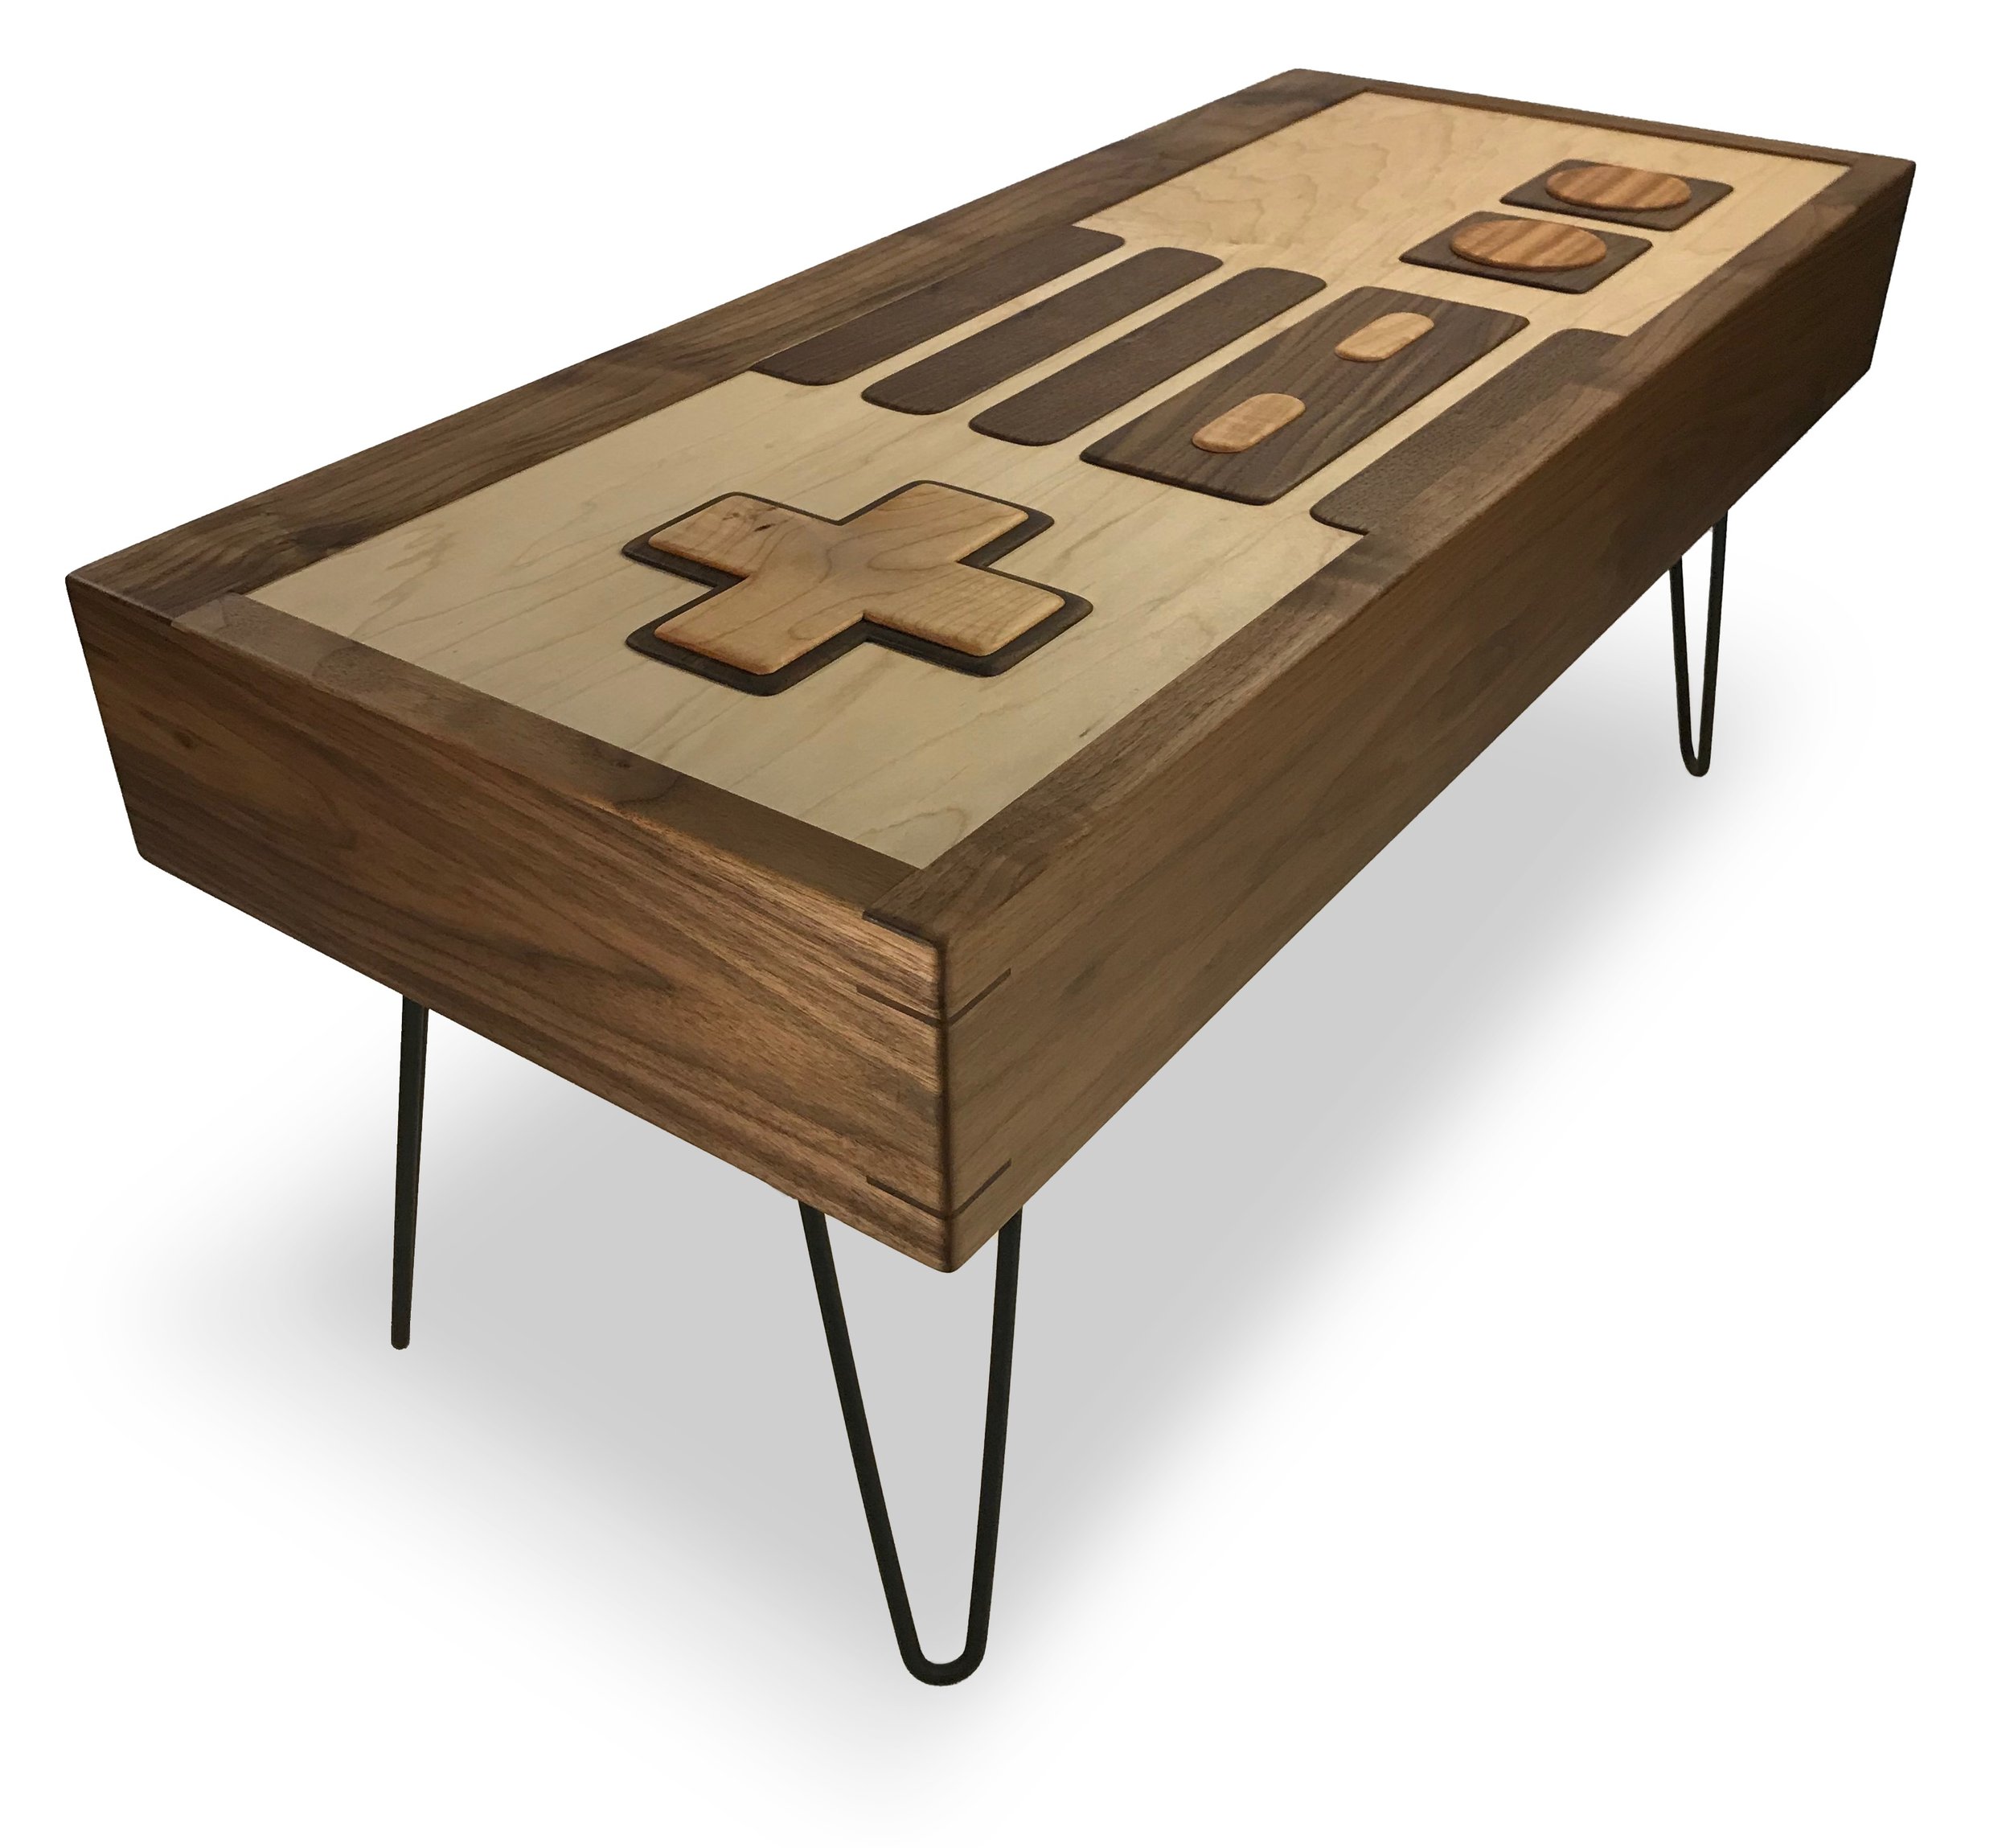 8-BIT STEALTH COFFEE TABLE